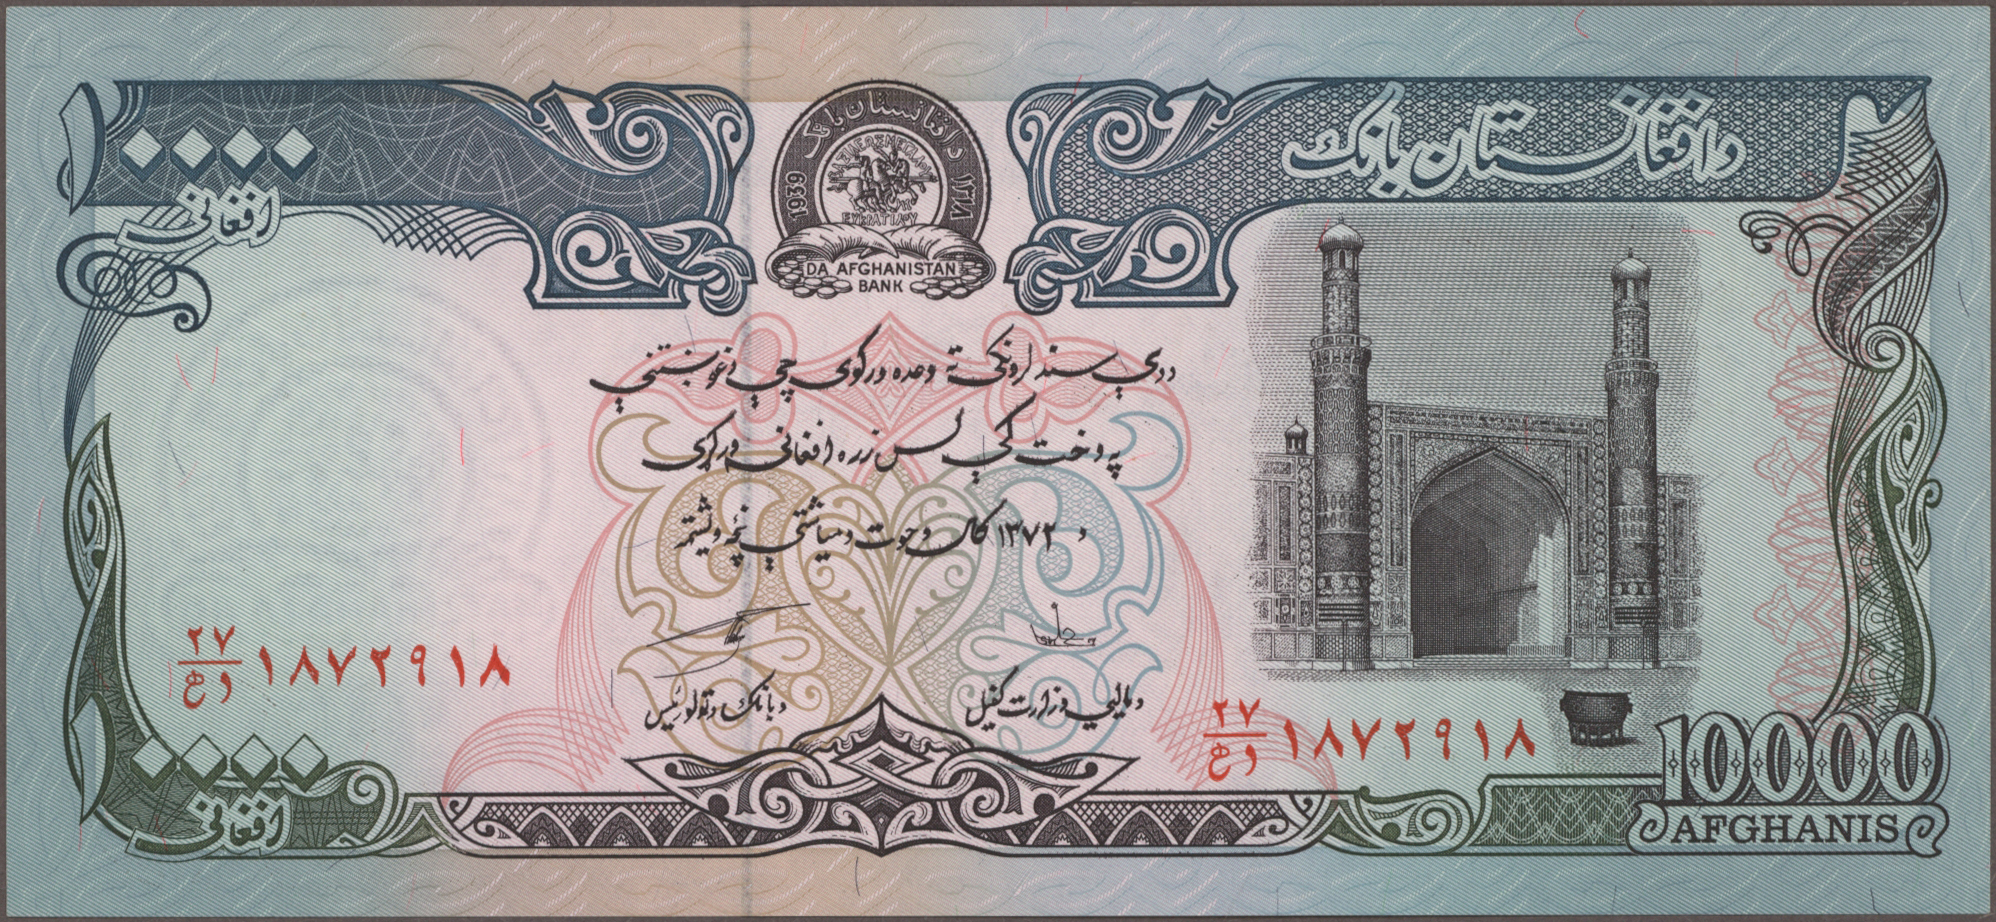 Lot 00006 - Afghanistan | Banknoten  -  Auktionshaus Christoph Gärtner GmbH & Co. KG 55th AUCTION - Day 1